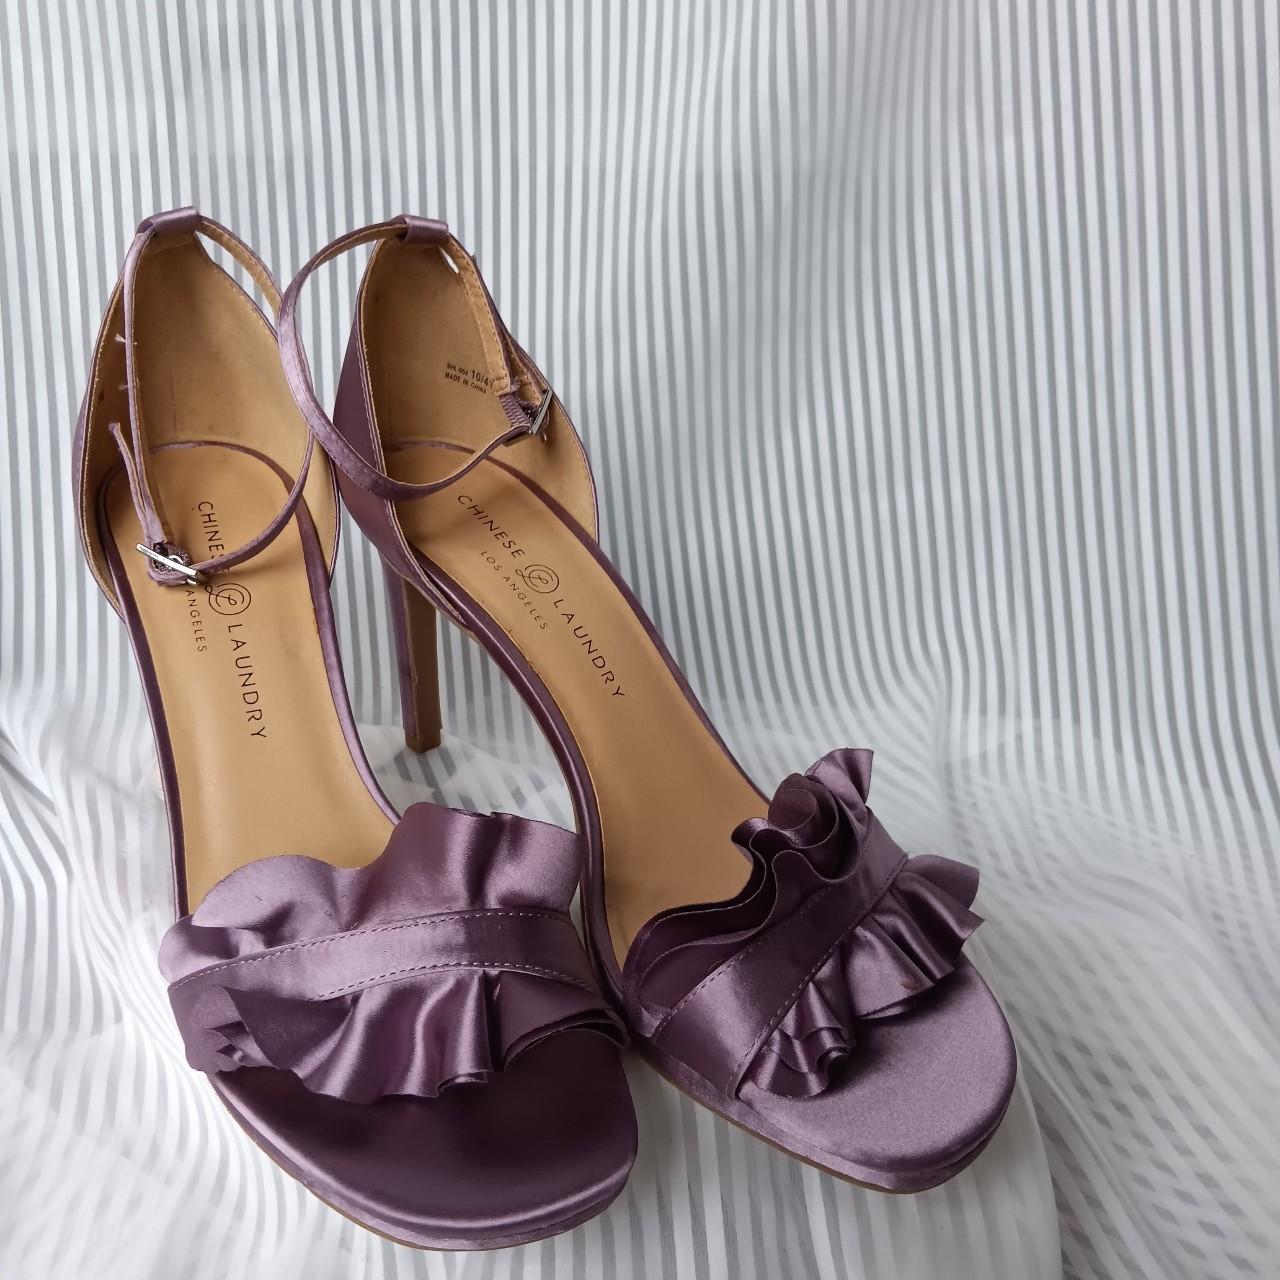 Buy Lavender Butterfly Heels, Garden Party Shoes Online in India - Etsy